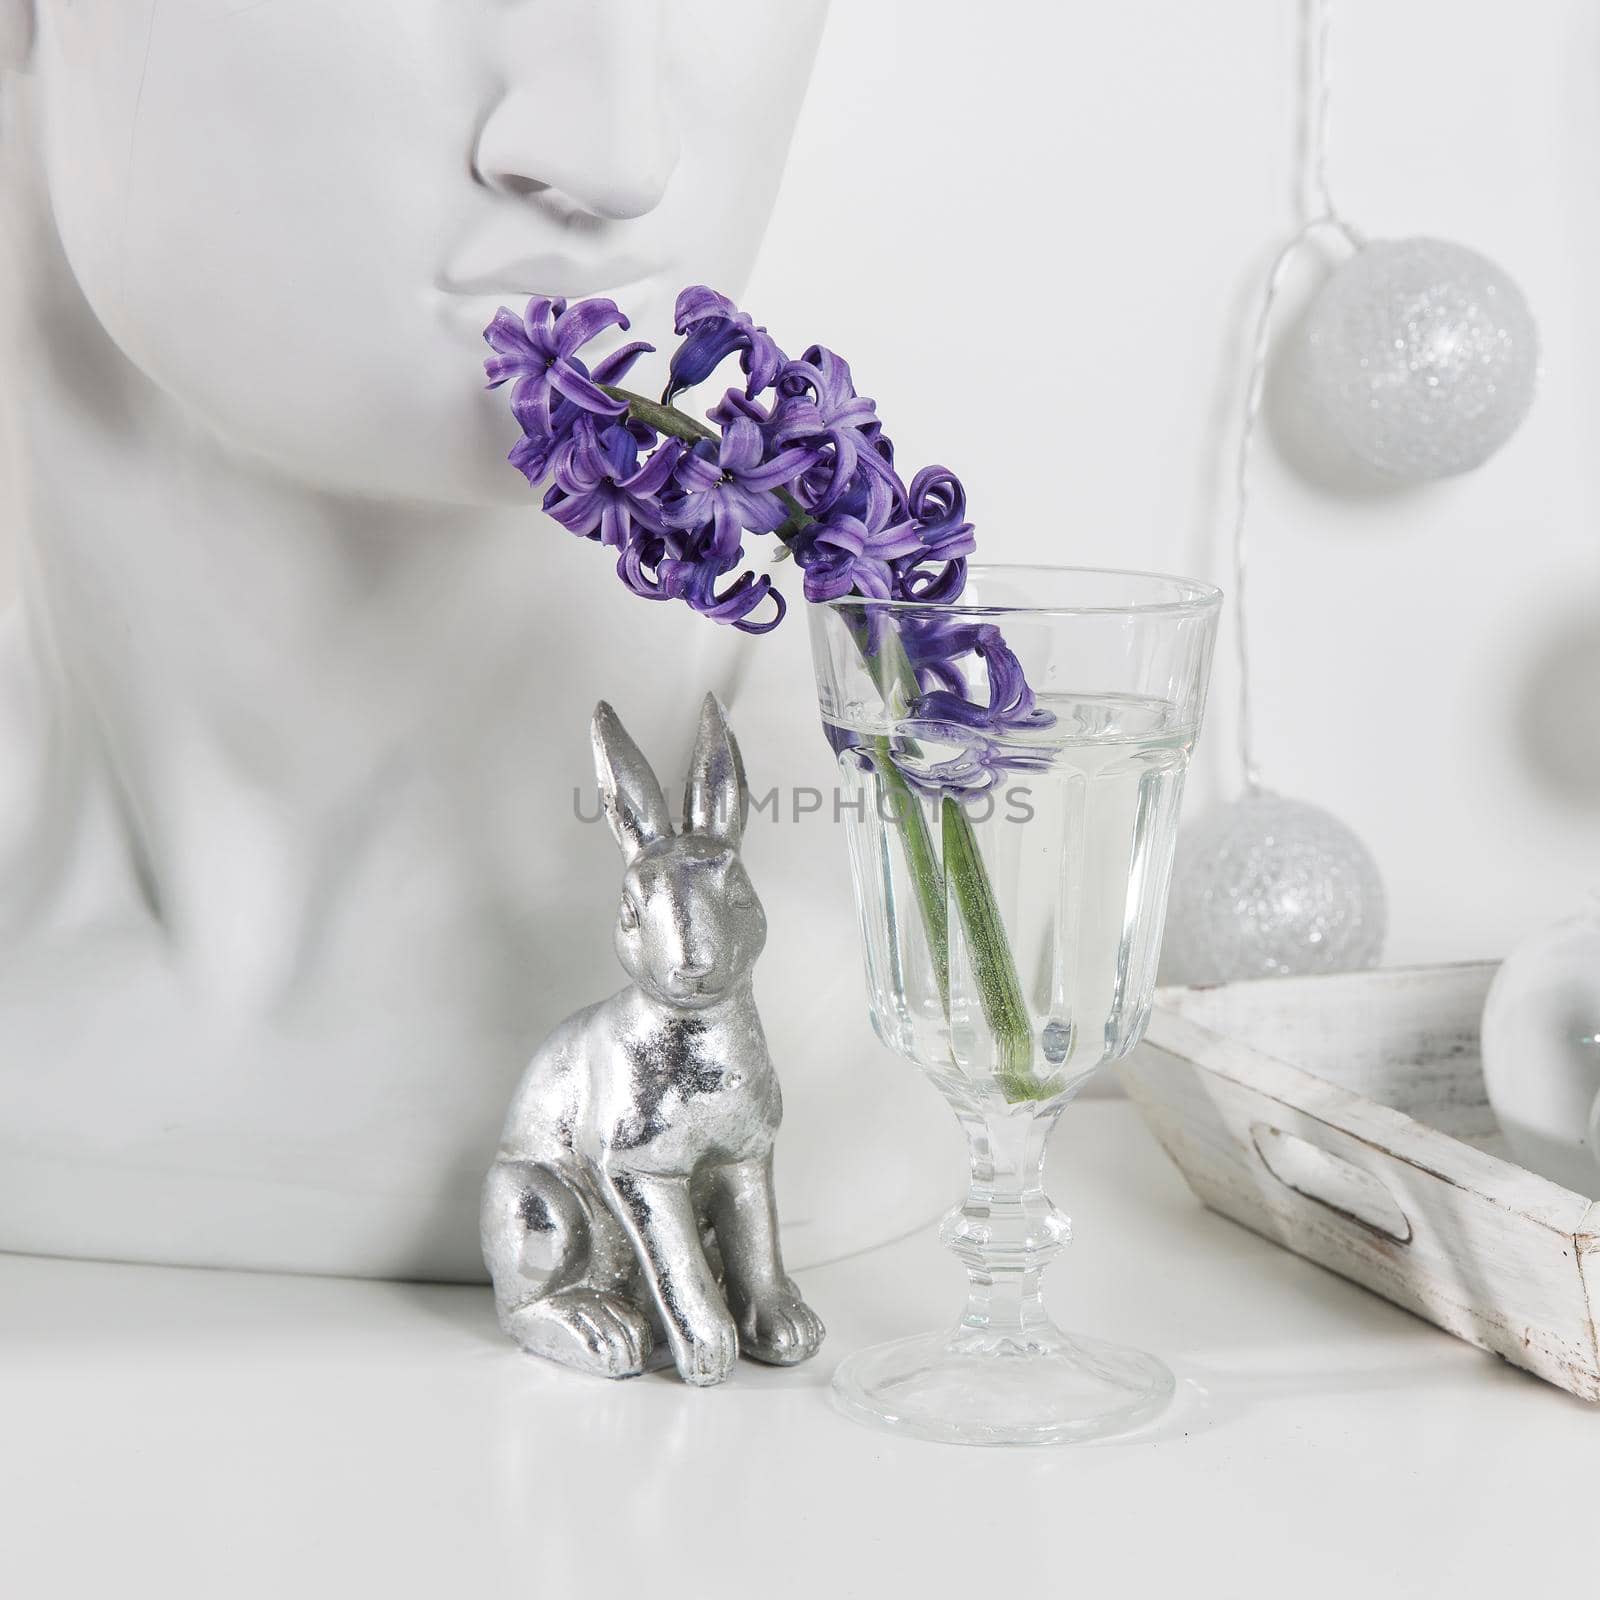 Ceramic figurines of Easter bunnies of different sizes on the table. Blue and white hyacinths in glass cups on a white background. Easter design